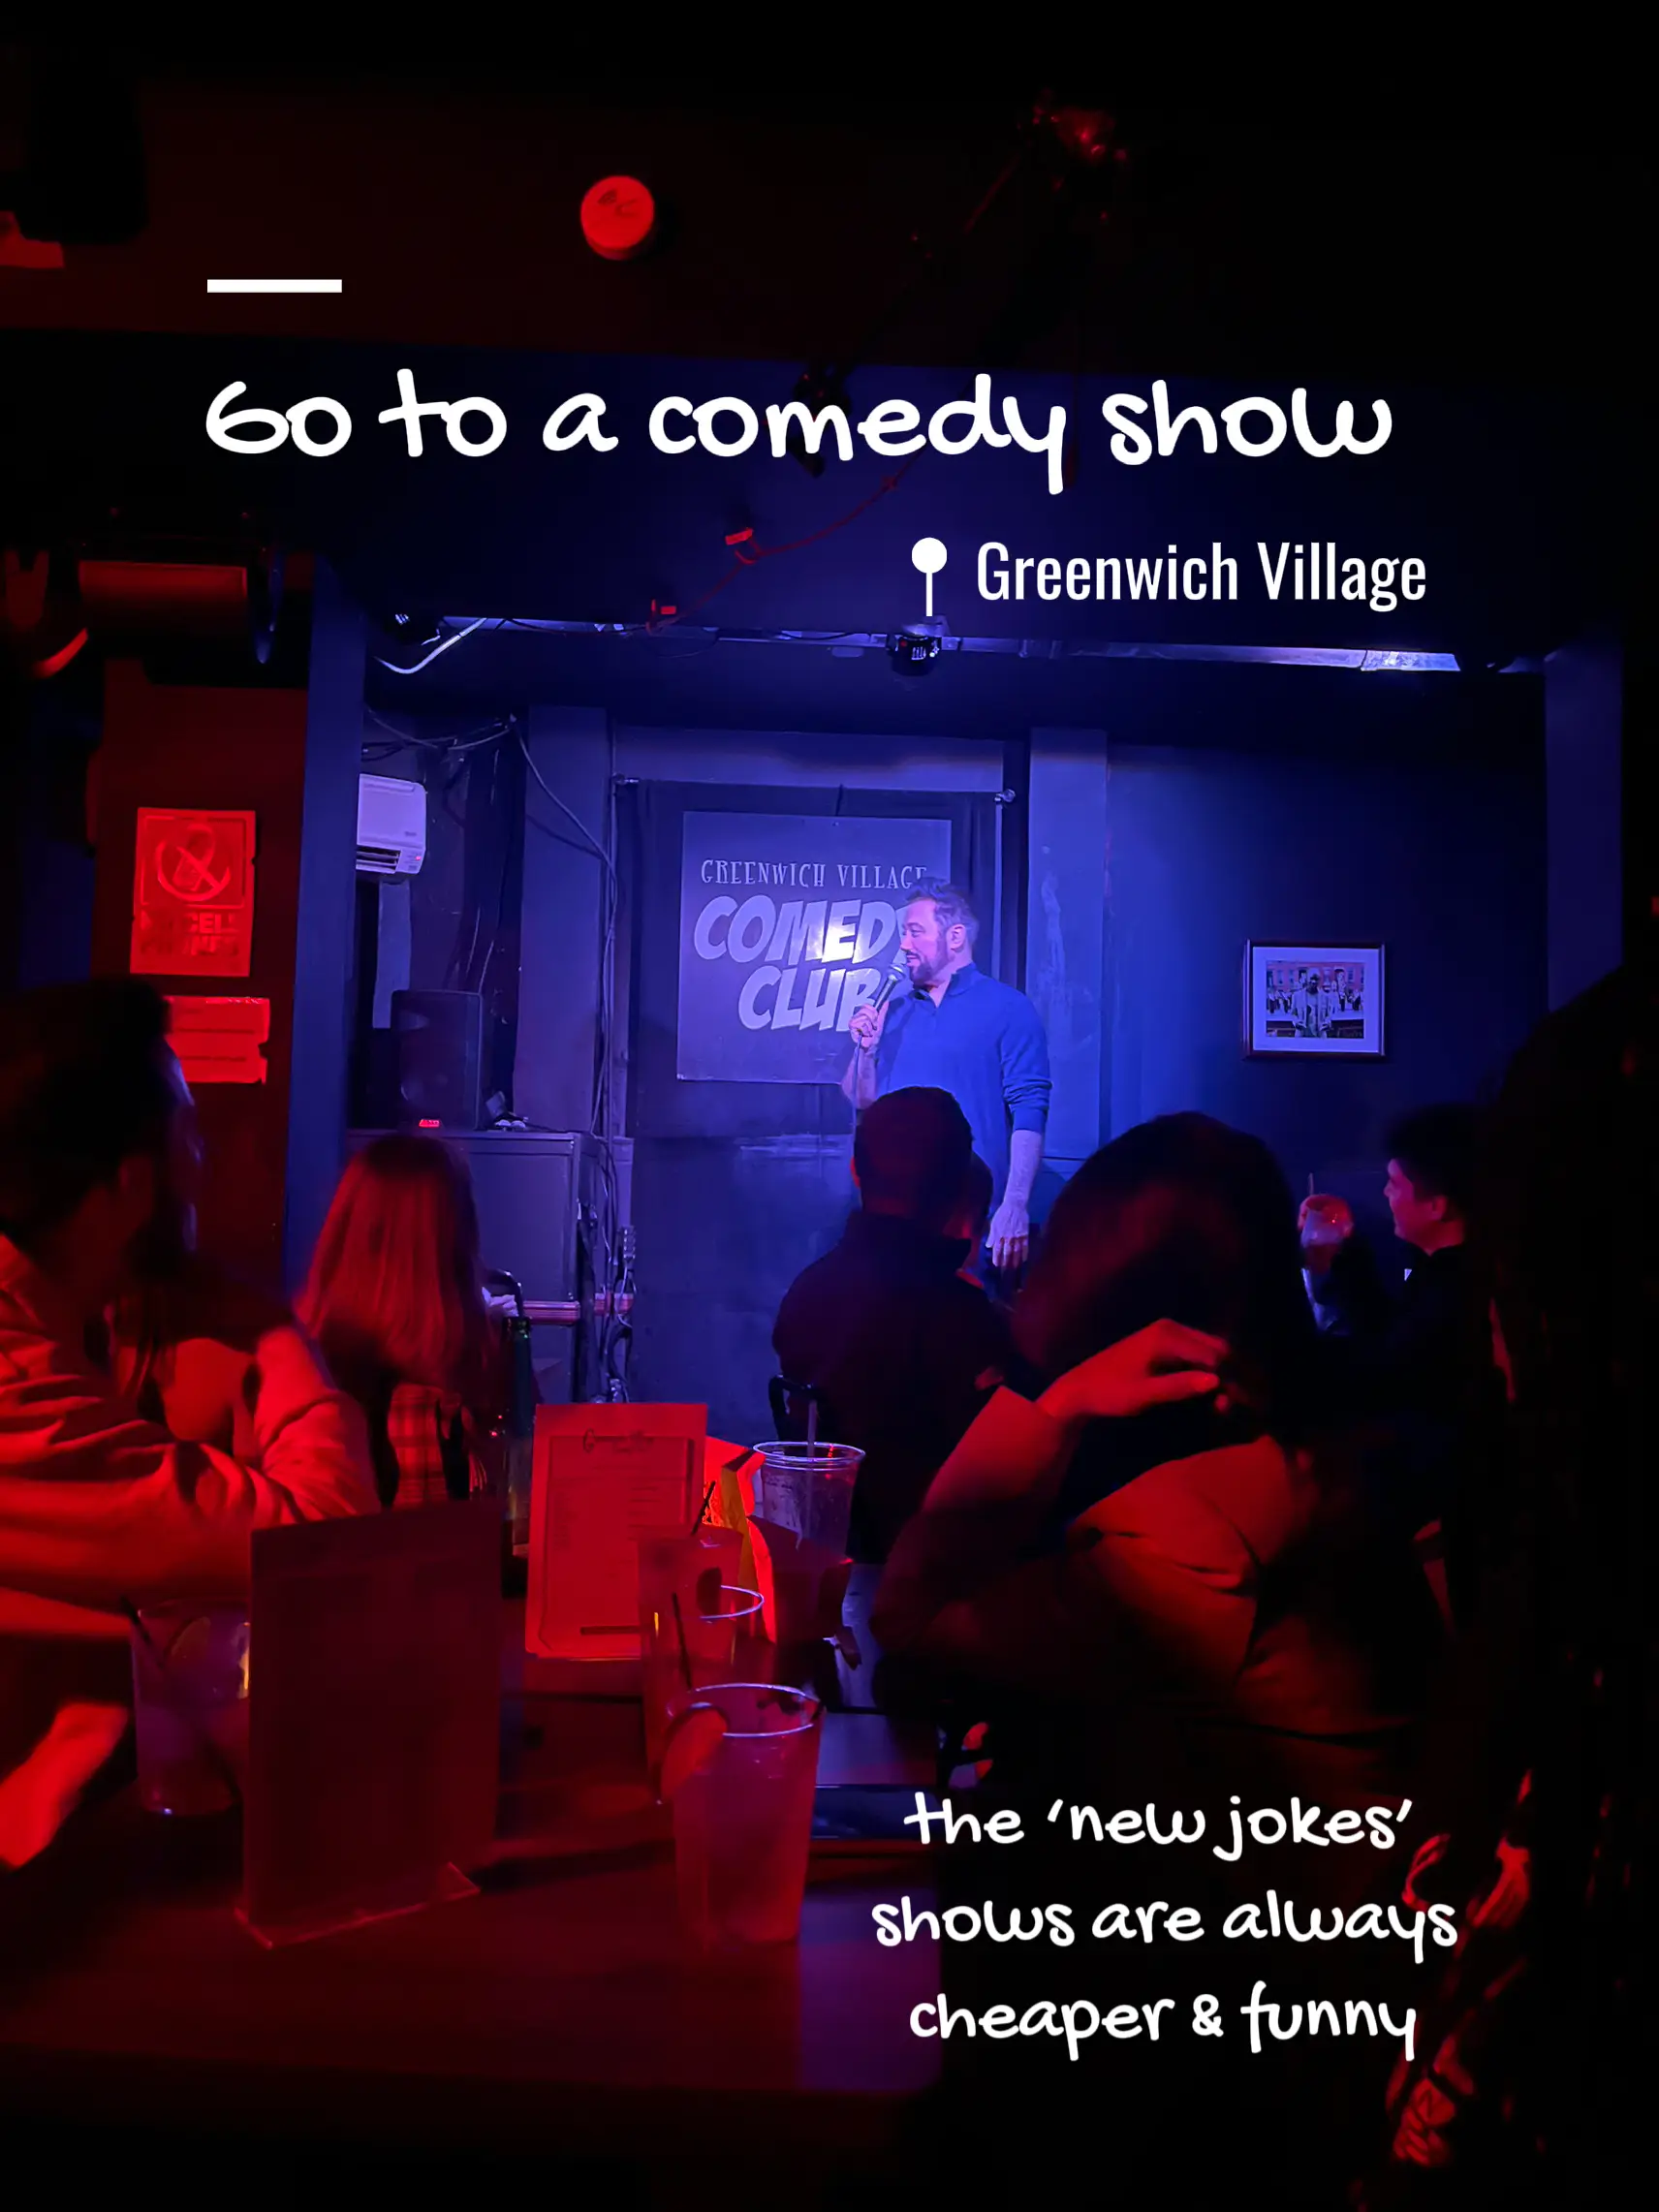  A man is standing on stage at a comedy show in Greenwich Village.